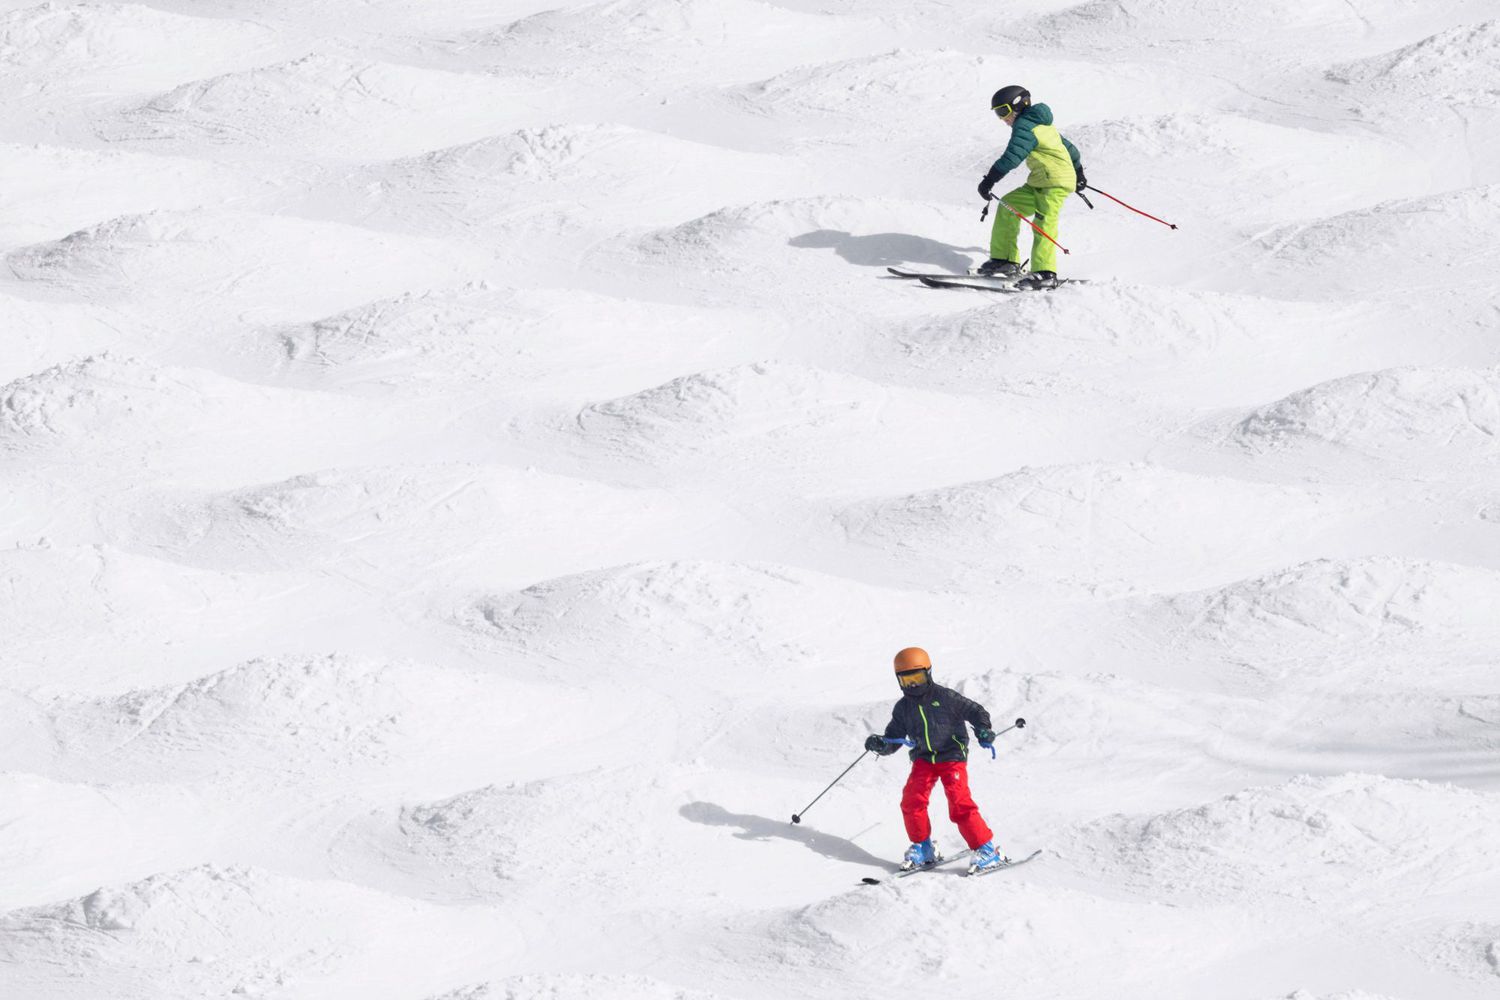 Two skiers at Lutsen Mountains